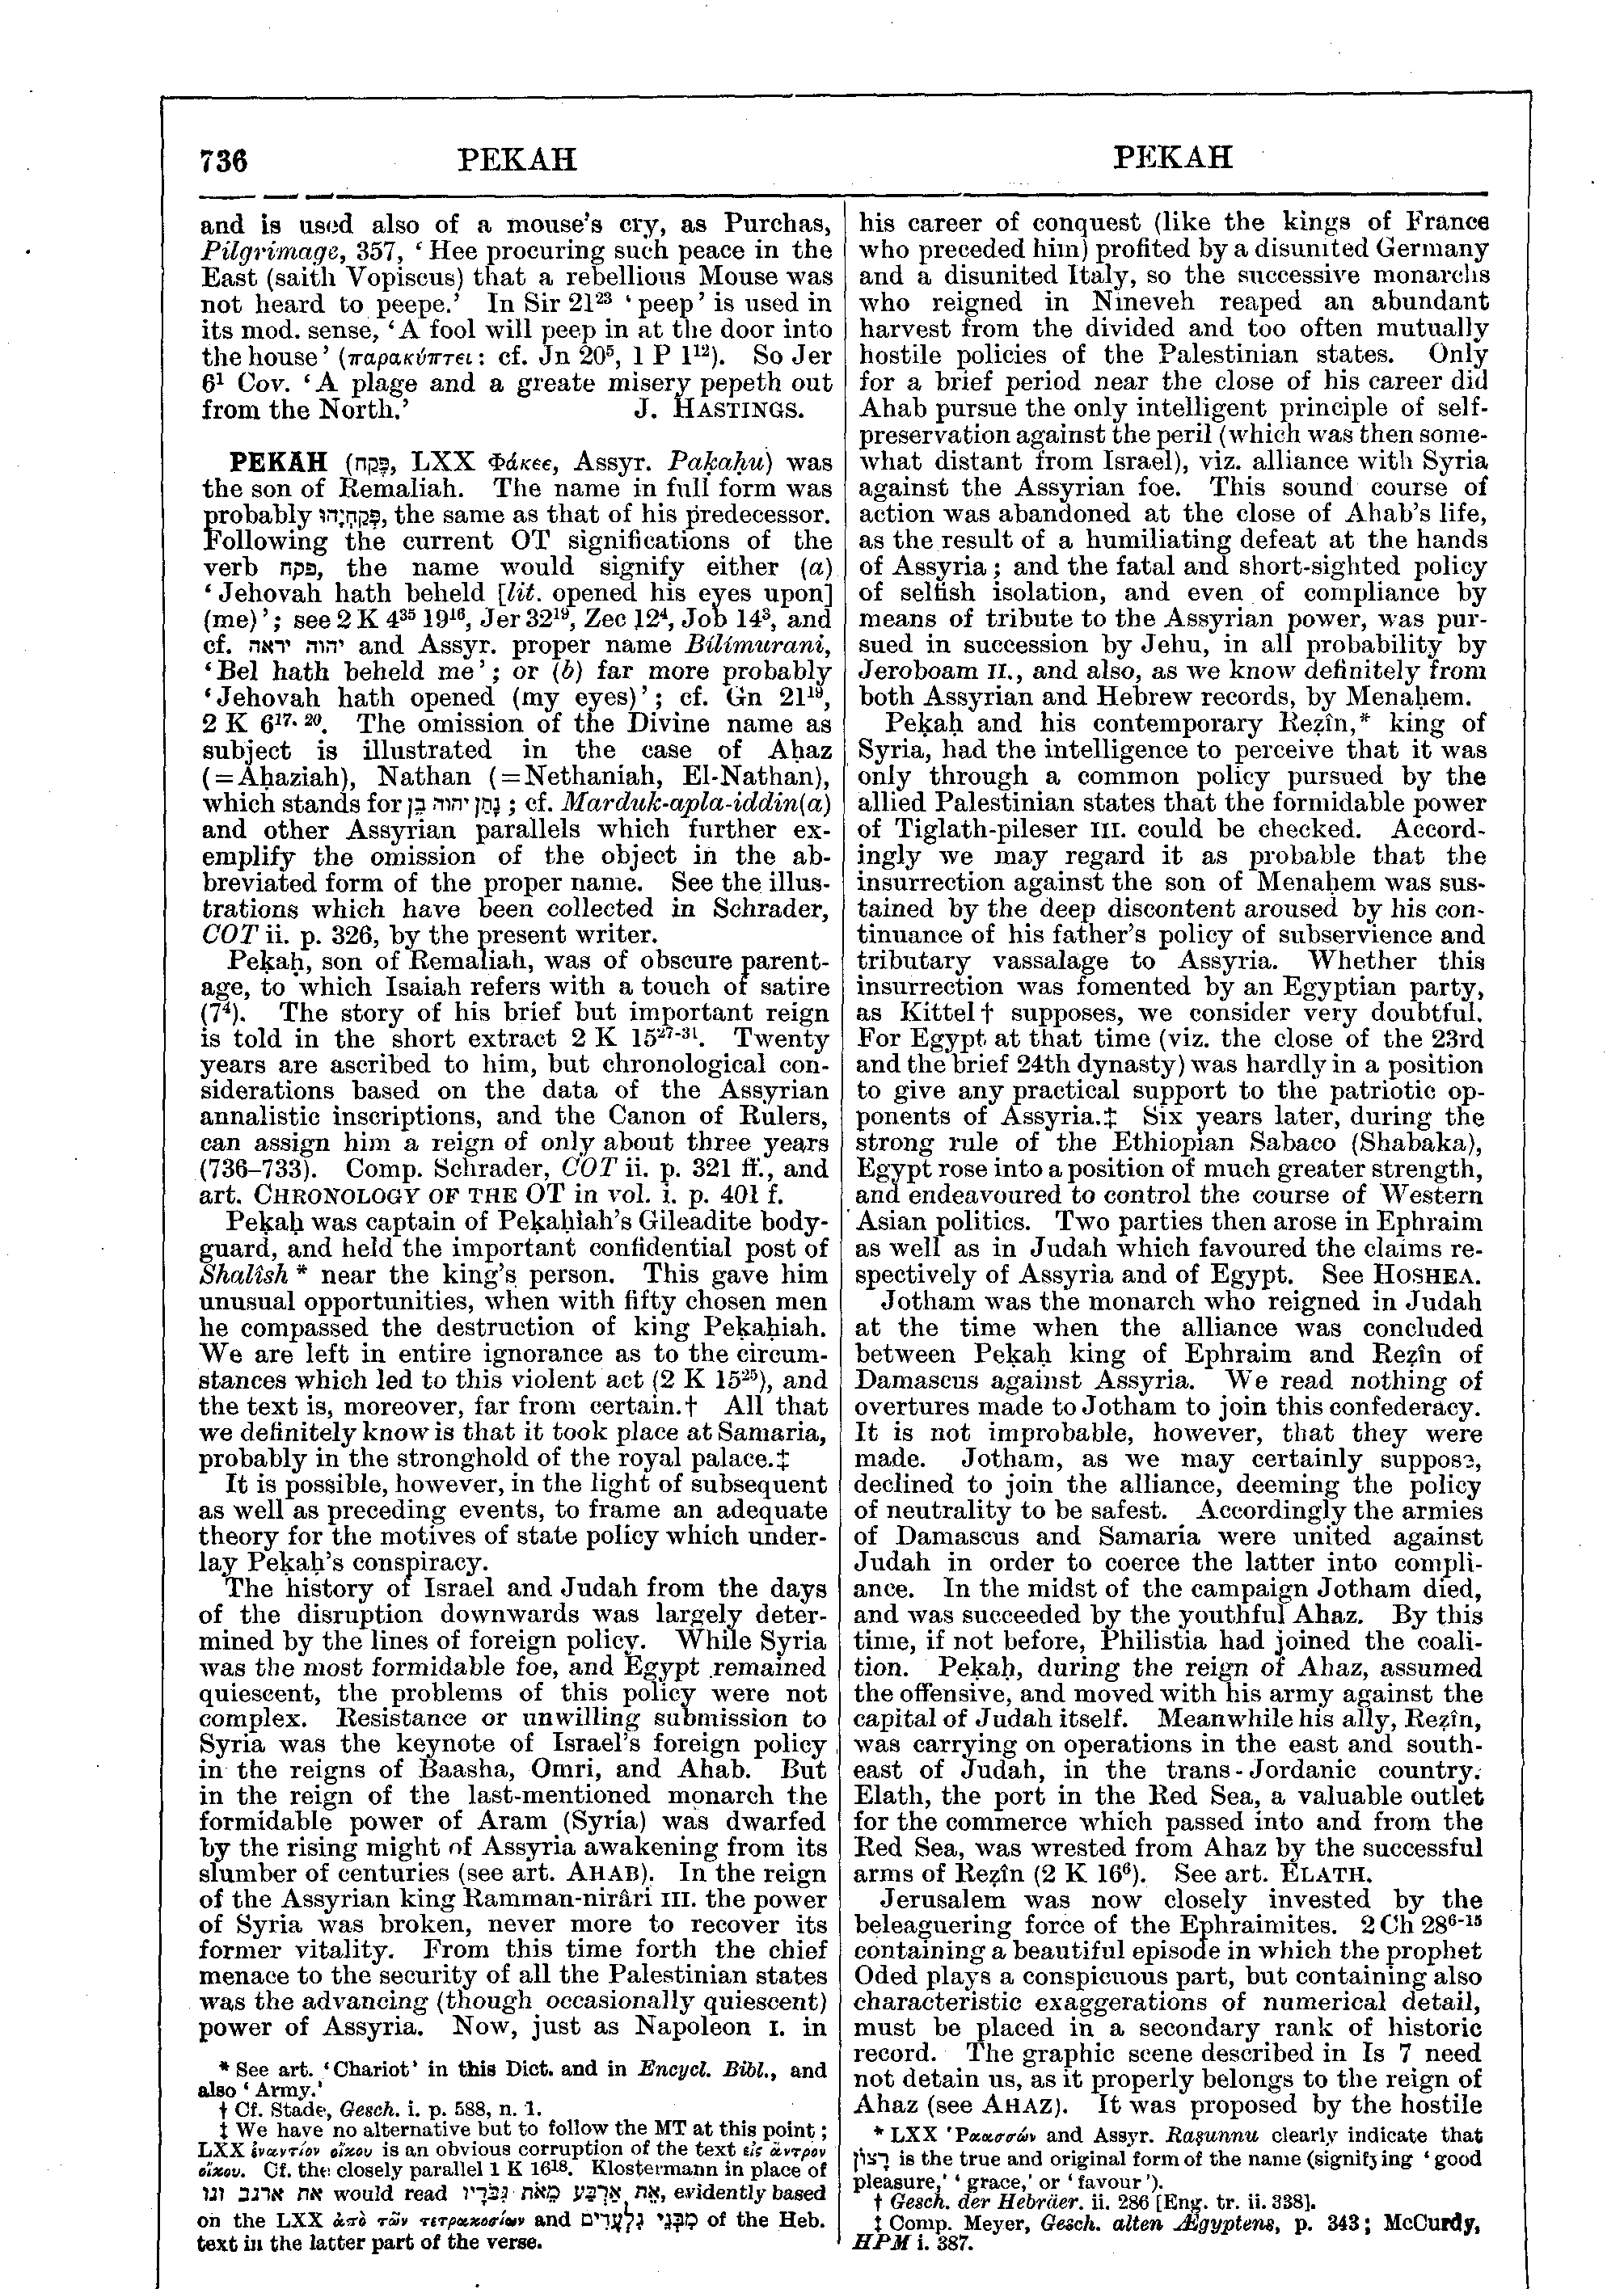 Image of page 736